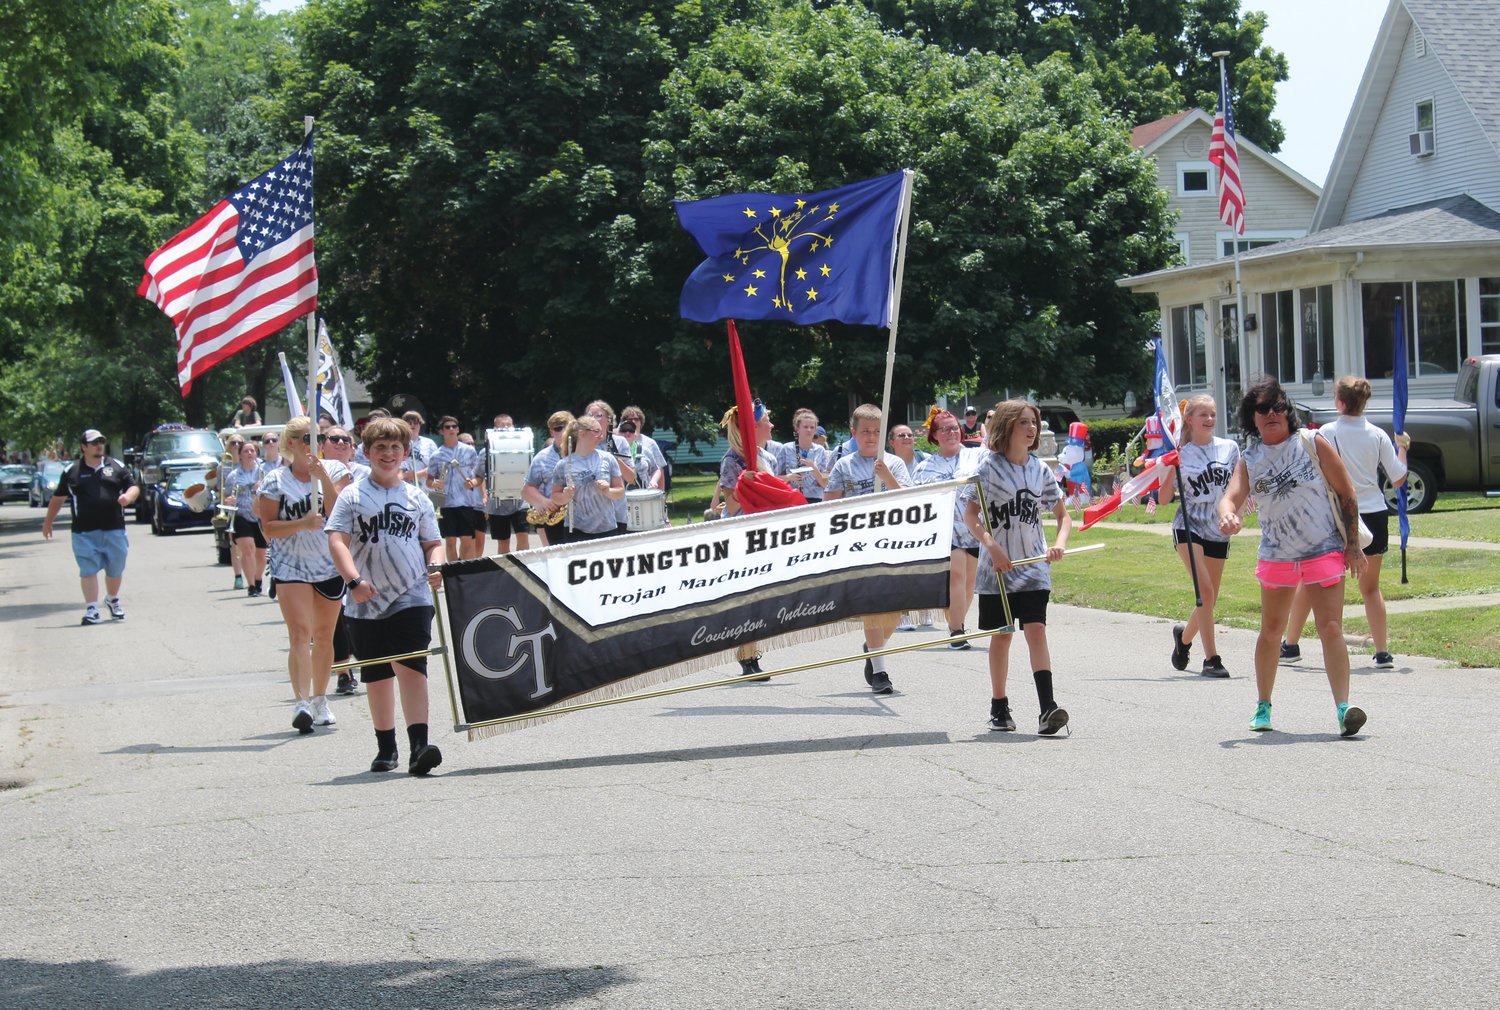 Members of the Covington High School Marching Band braved the heat to entertain parade-goers.